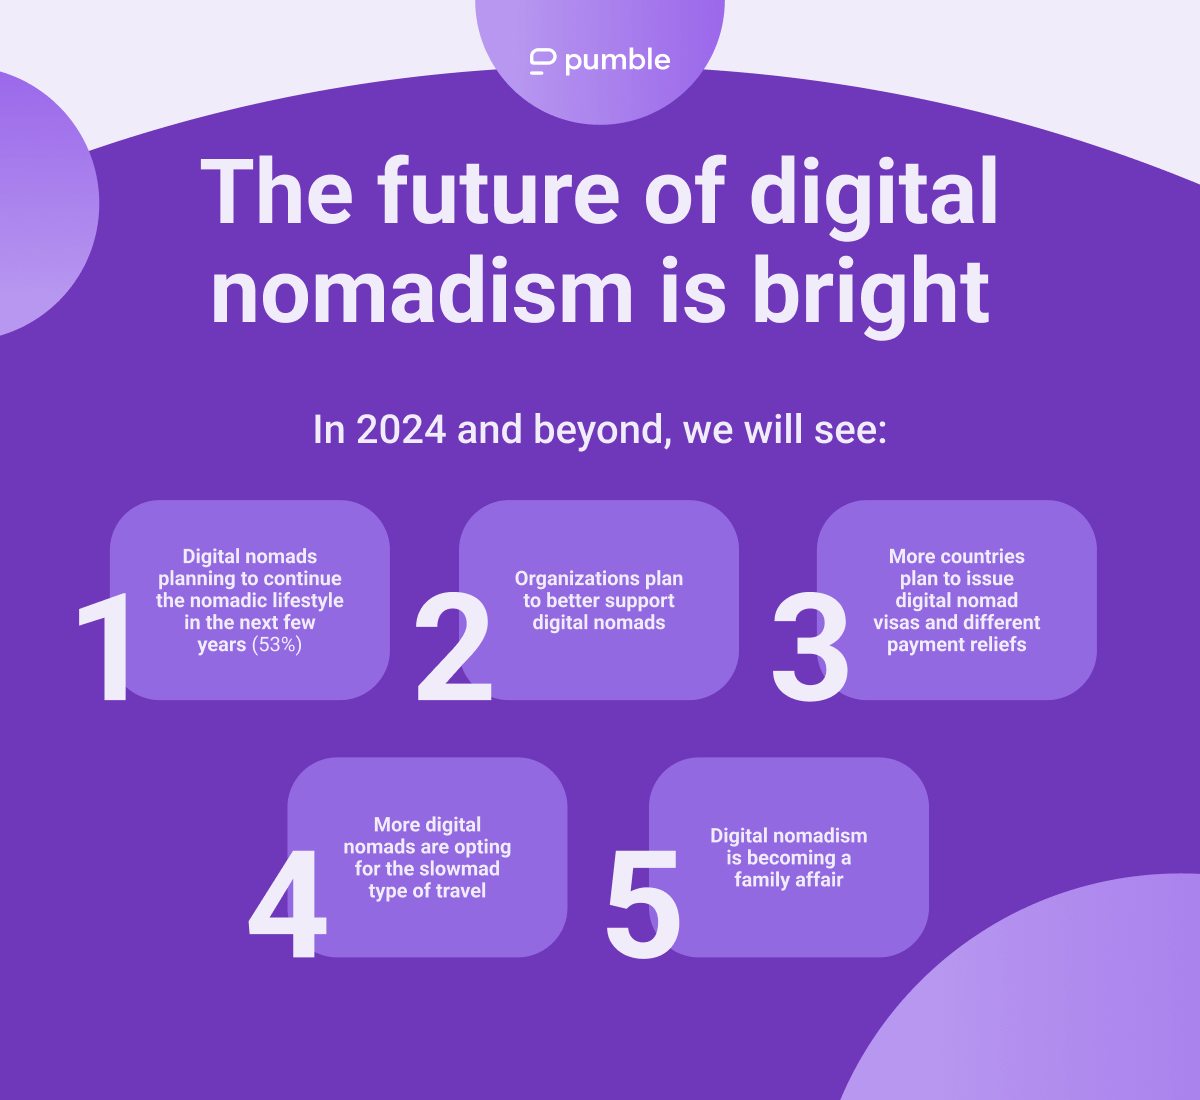 The future of digital nomadism is bright 2024